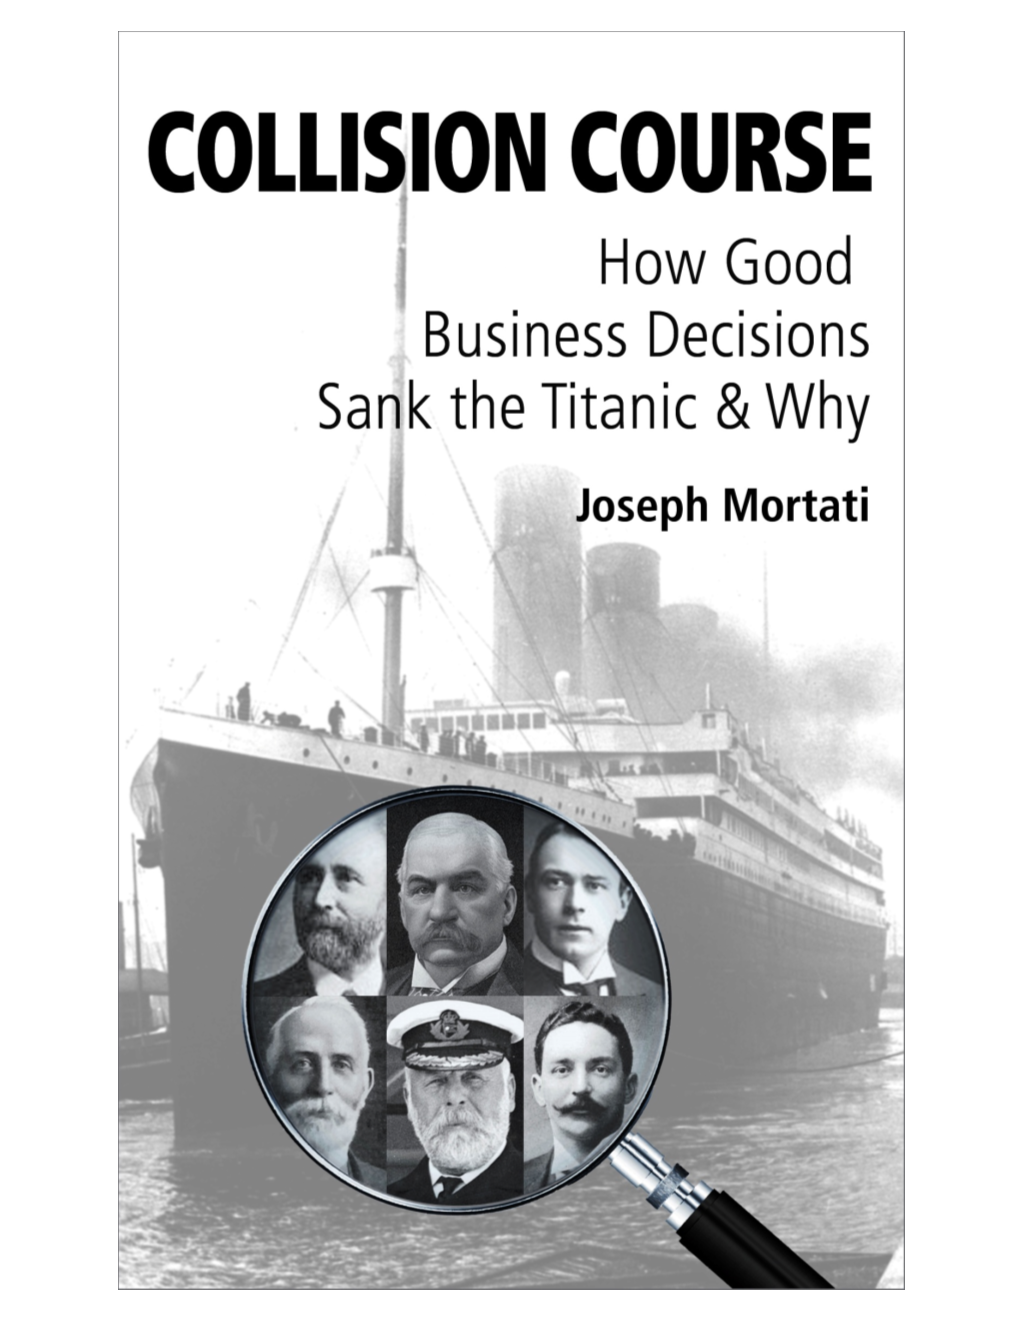 Collision Course - How Good Business Decisions Sank the Titanic and Why © Copyright Joseph Mortati, 2013, ISBN 978-0-9854291-1-9